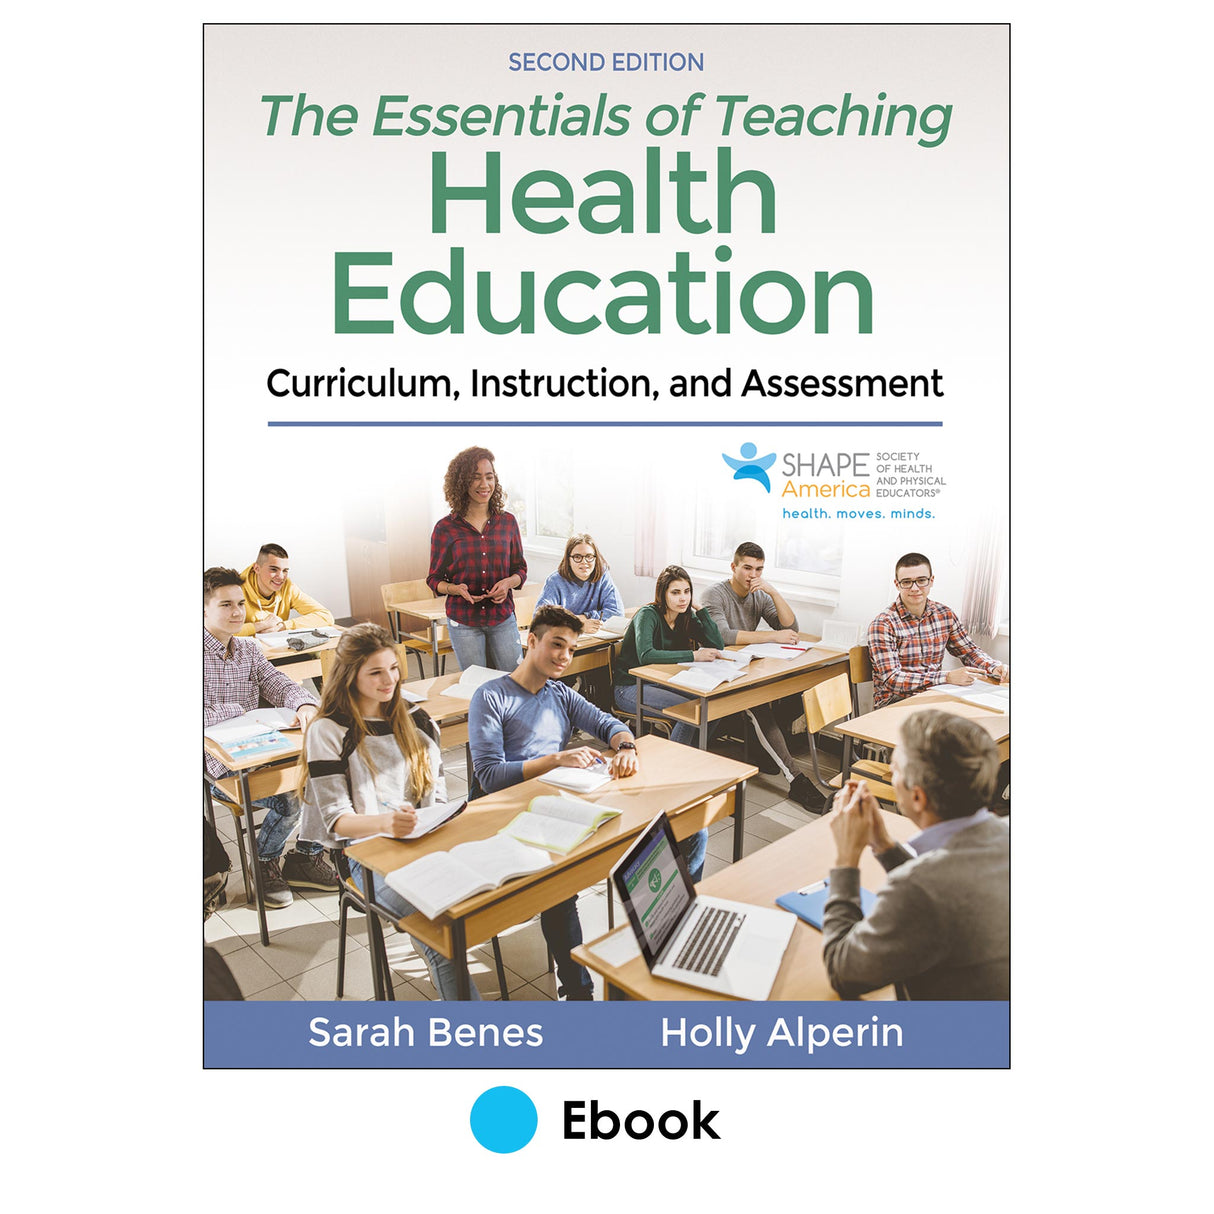 Essentials of Teaching Health Education 2nd Edition Ebook With HKPropel
Access, The